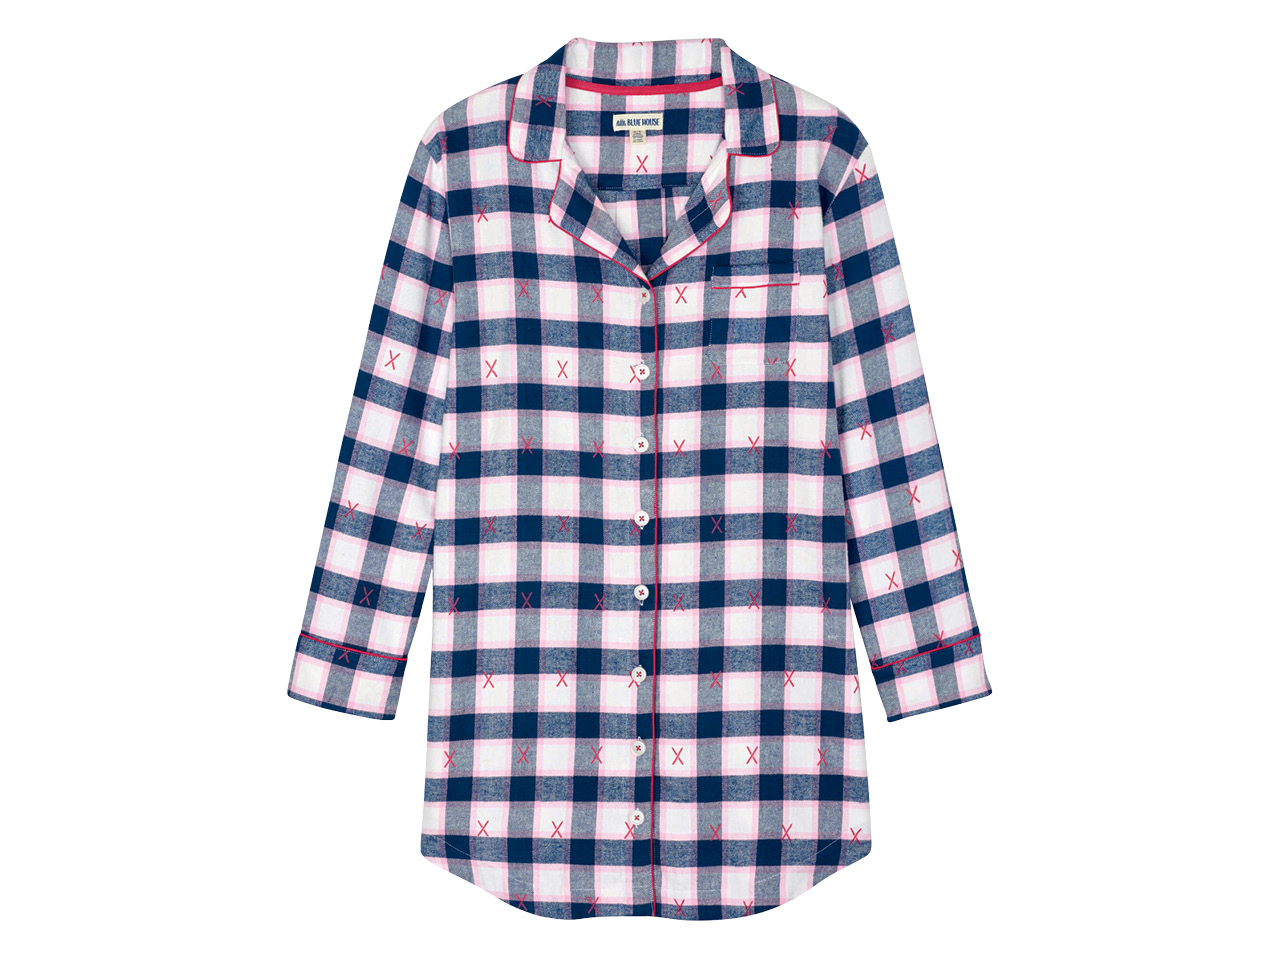 White and navy blue checkered flannel nightshirt.